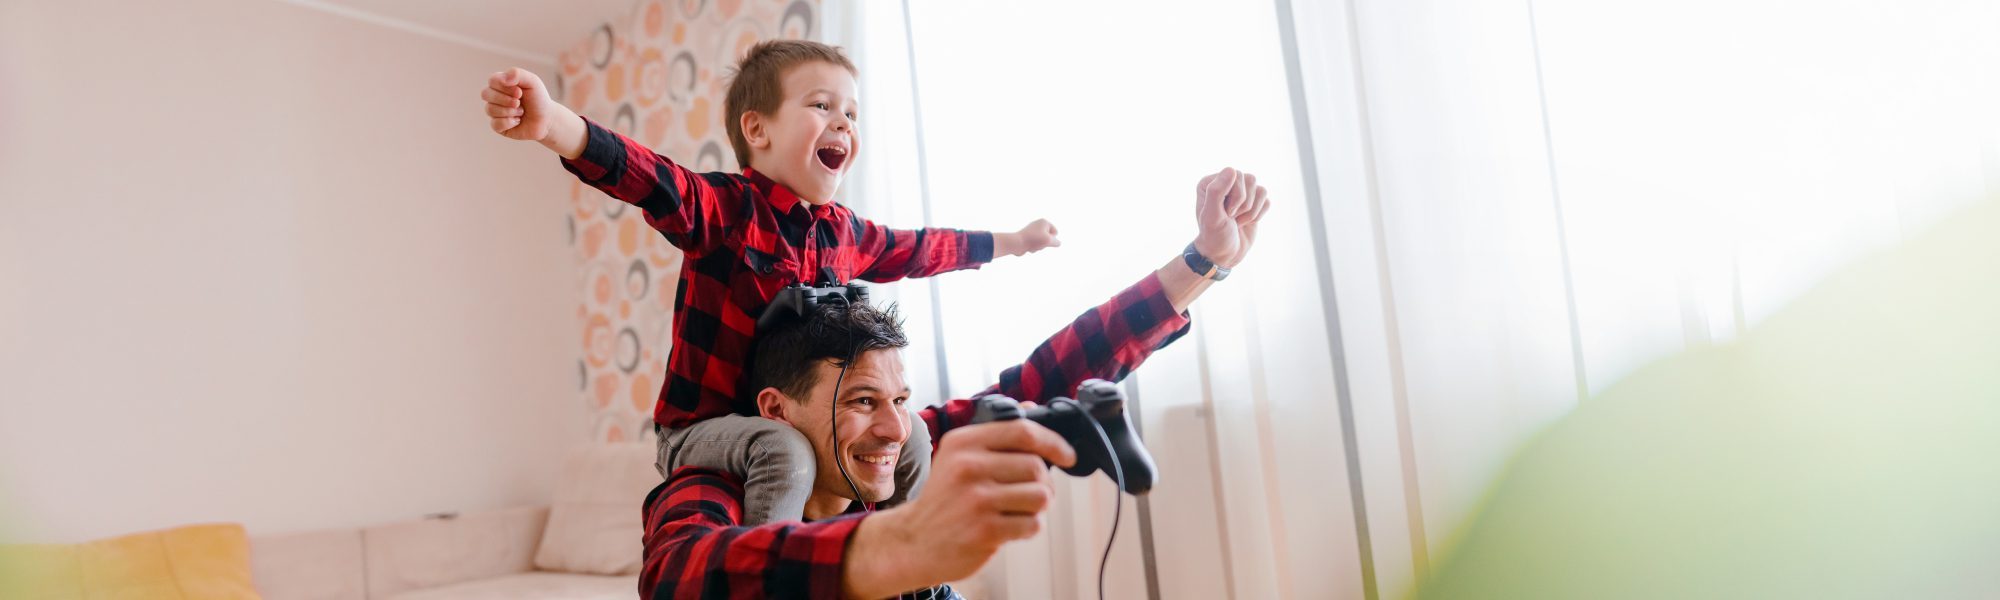 father and child playing video games victorious